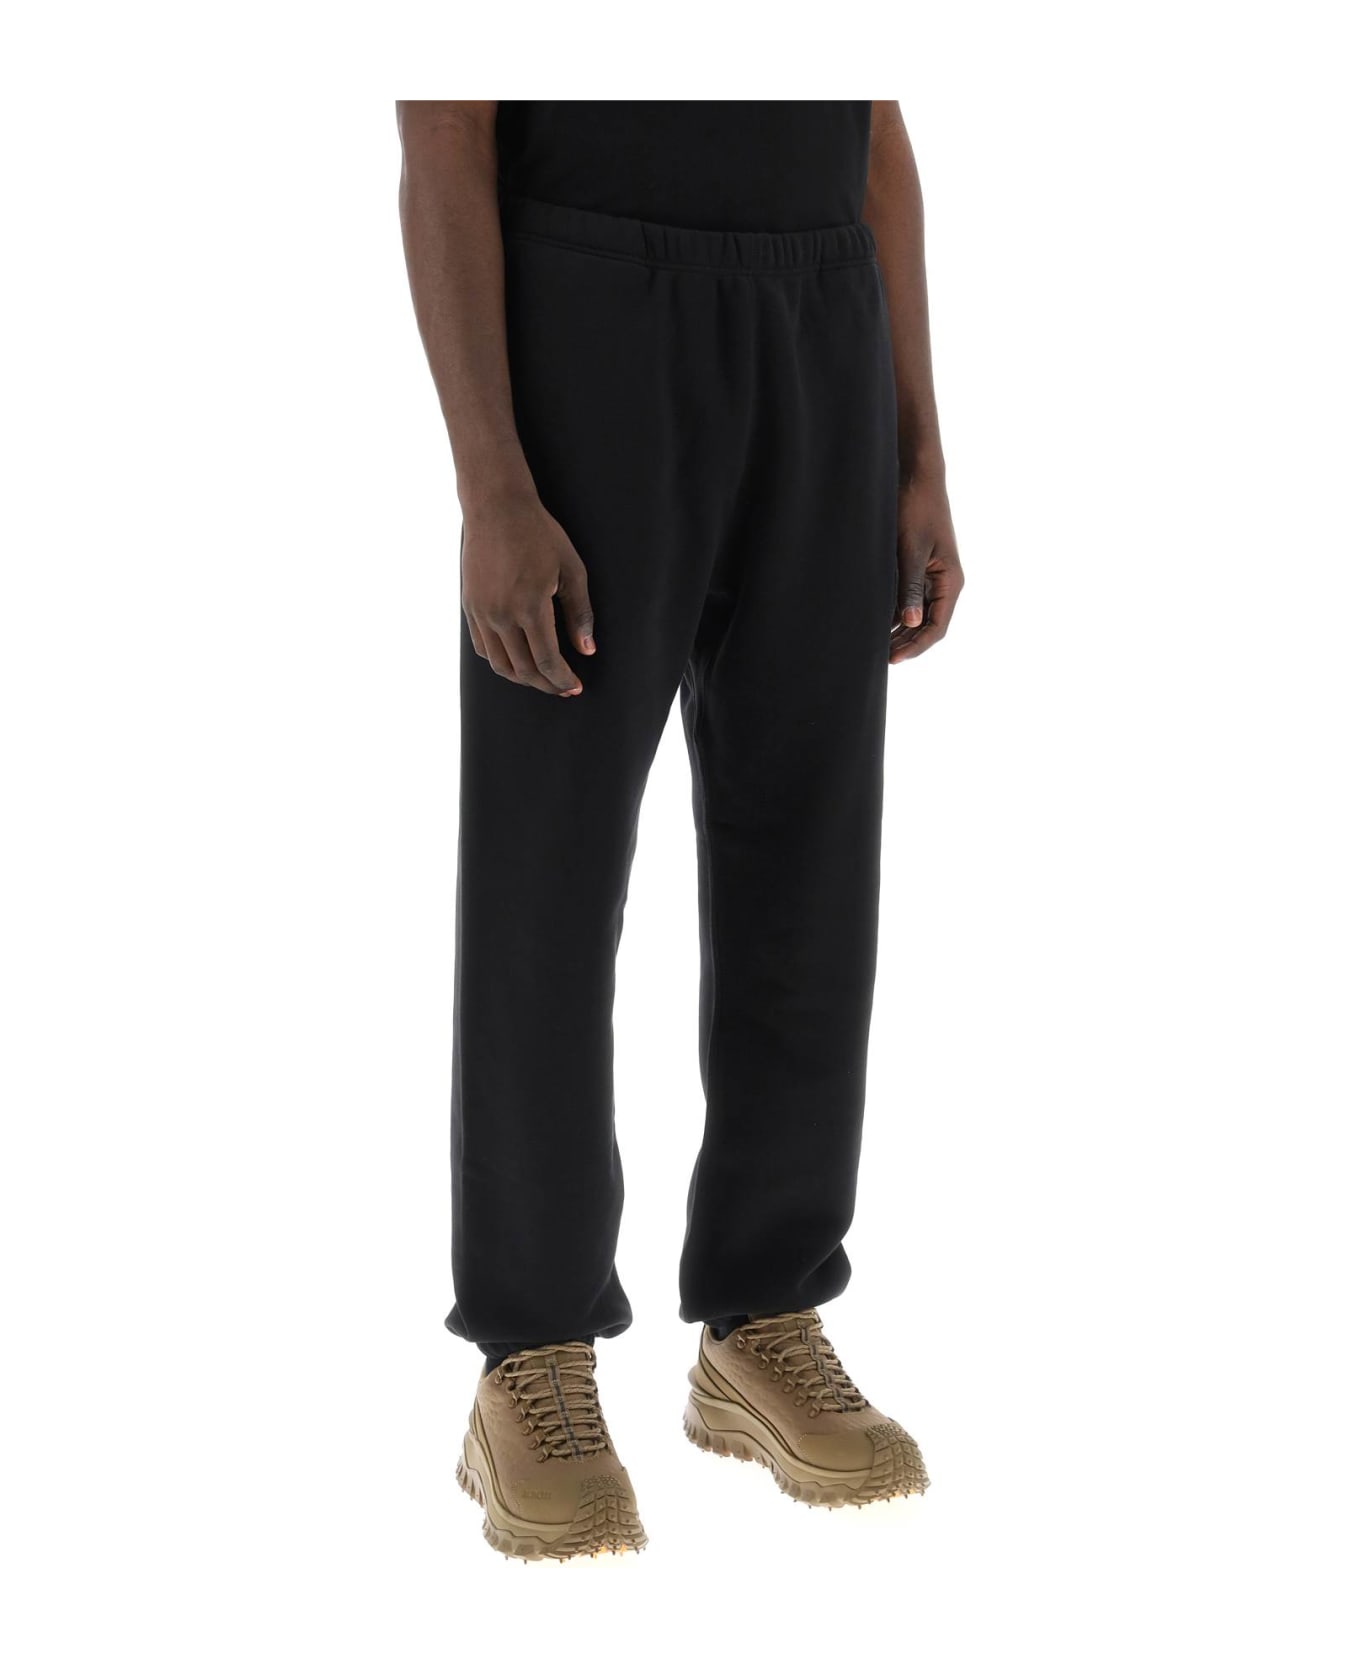 Moncler X Roc Nation Designed By Jay-z - Cotton Track-pants - black ボトムス